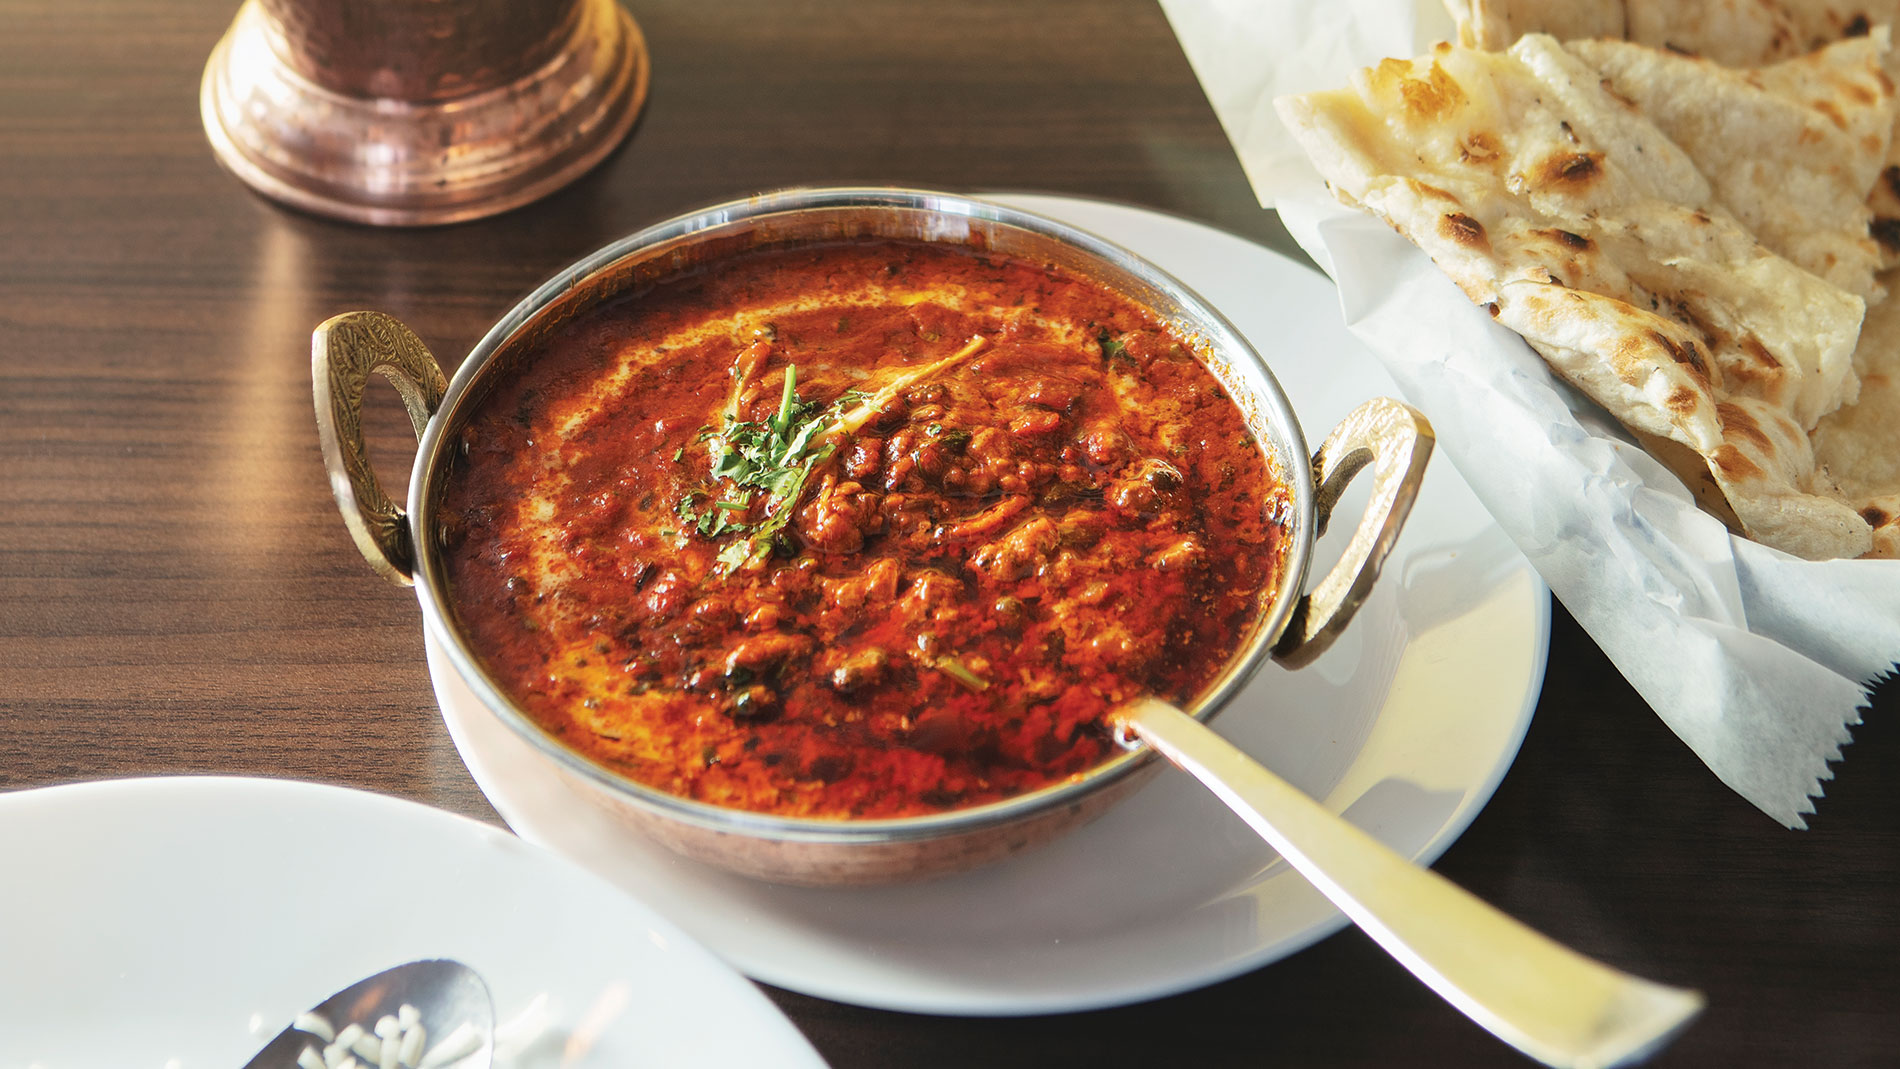 dal makhani at khanna’s desi vibes in st. louis